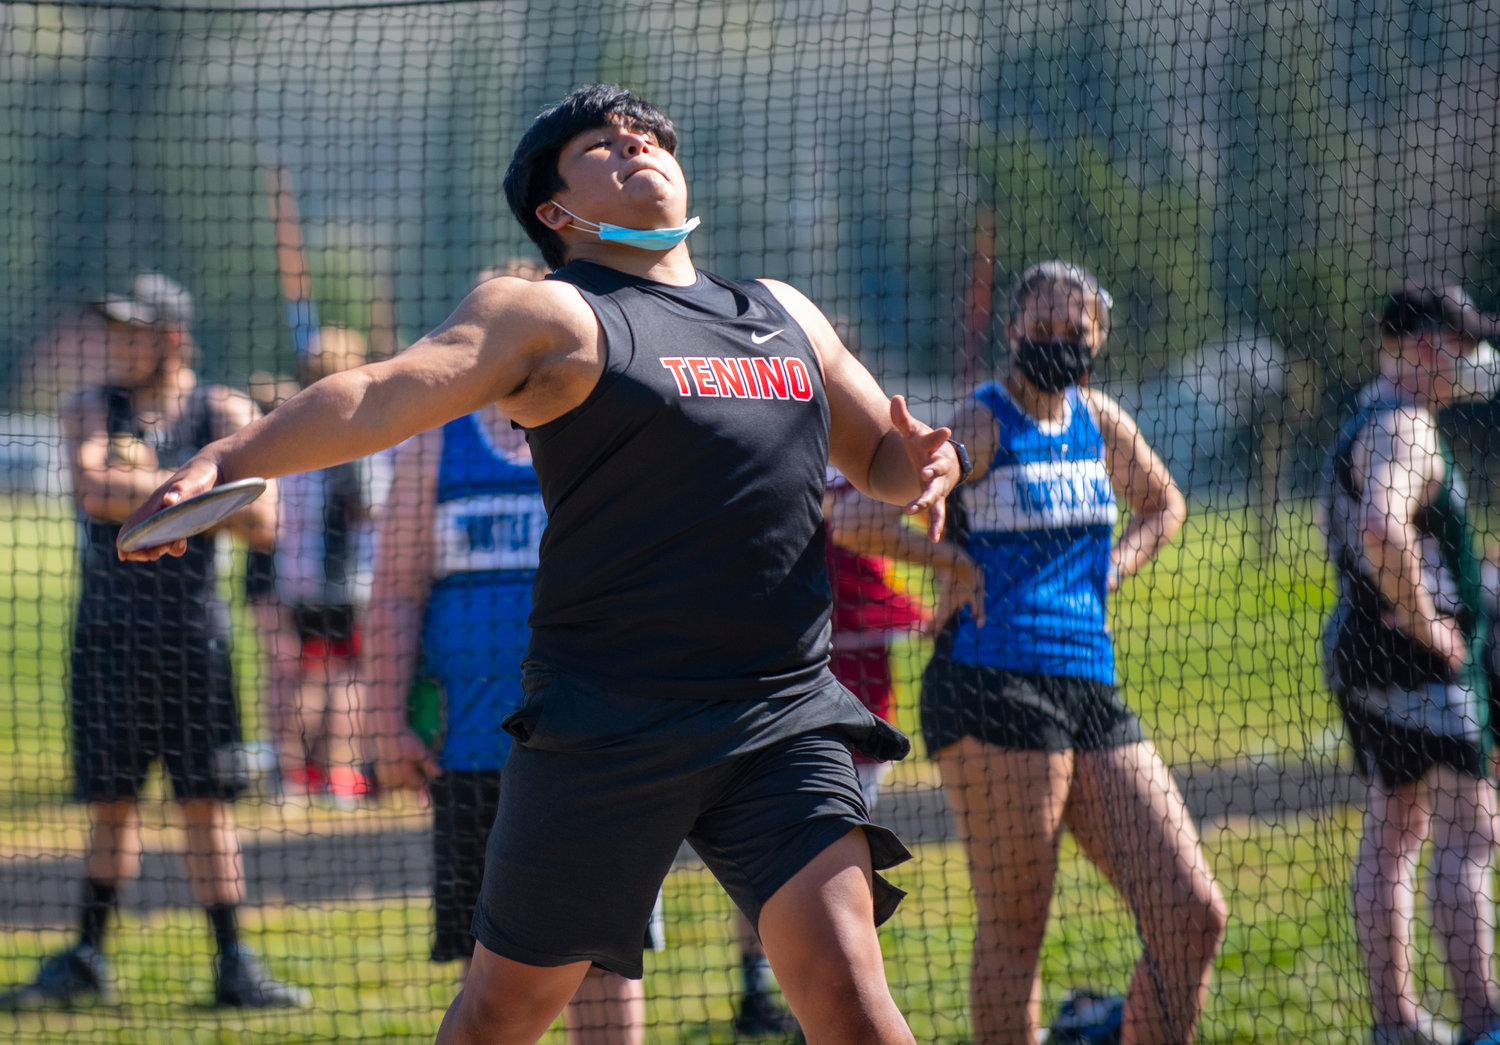 FILE PHOTO - Tenino's Andres Zamudio placed fourth in the boys discus at the 1A District 4 Track and Field Championships with a personal-record throw of 109-01.